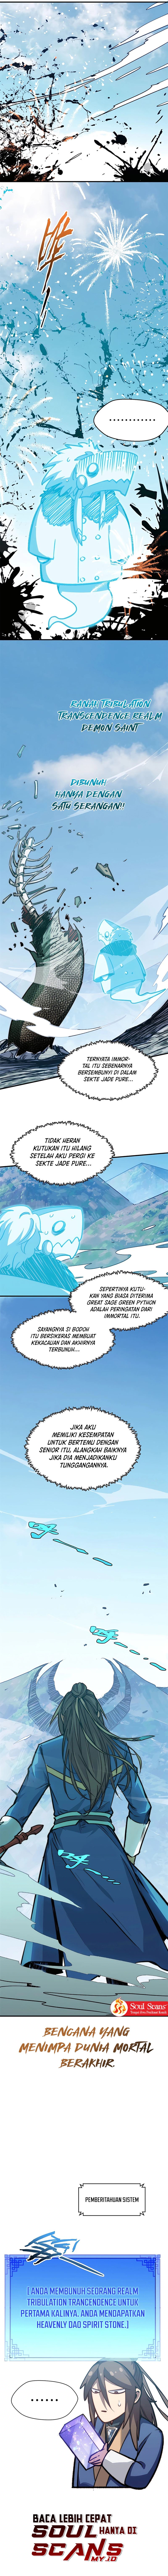 Dilarang COPAS - situs resmi www.mangacanblog.com - Komik top tier providence secretly cultivate for a thousand years 112 - chapter 112 113 Indonesia top tier providence secretly cultivate for a thousand years 112 - chapter 112 Terbaru 5|Baca Manga Komik Indonesia|Mangacan